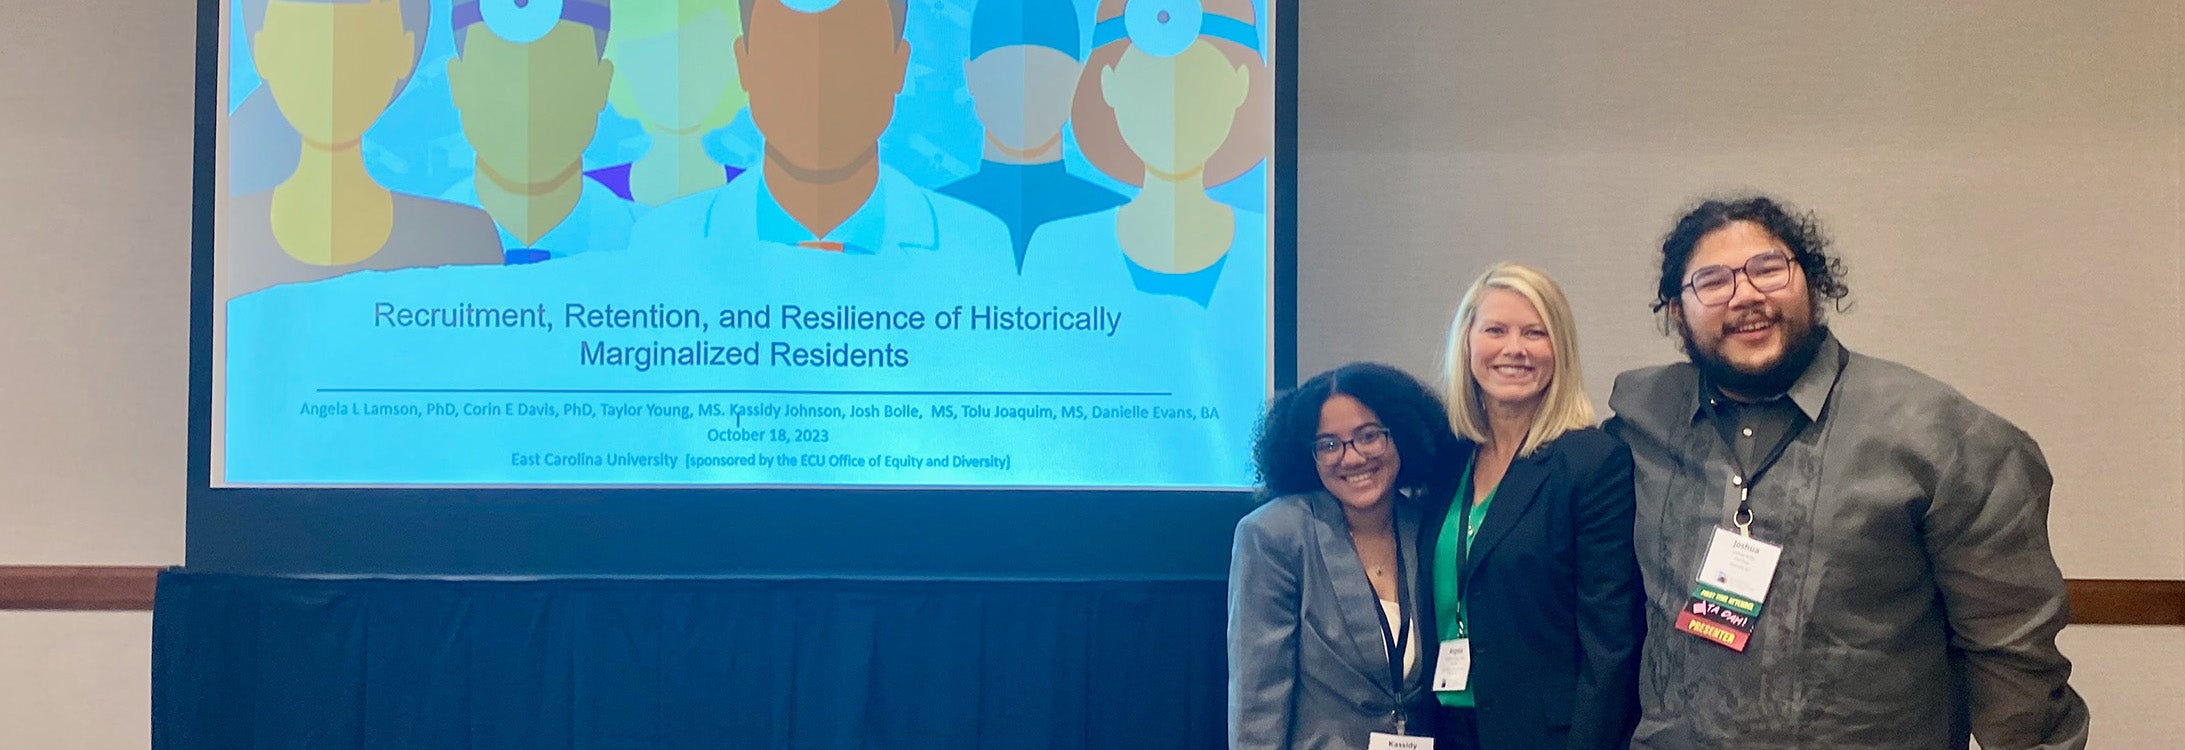 Dr. Angela Lamson with Kassidy Johnson (undergraduate biology student) and Josh Bolle (medical family therapy doctoral student) at the Collaborative Family Healthcare Association conference in Arizona.